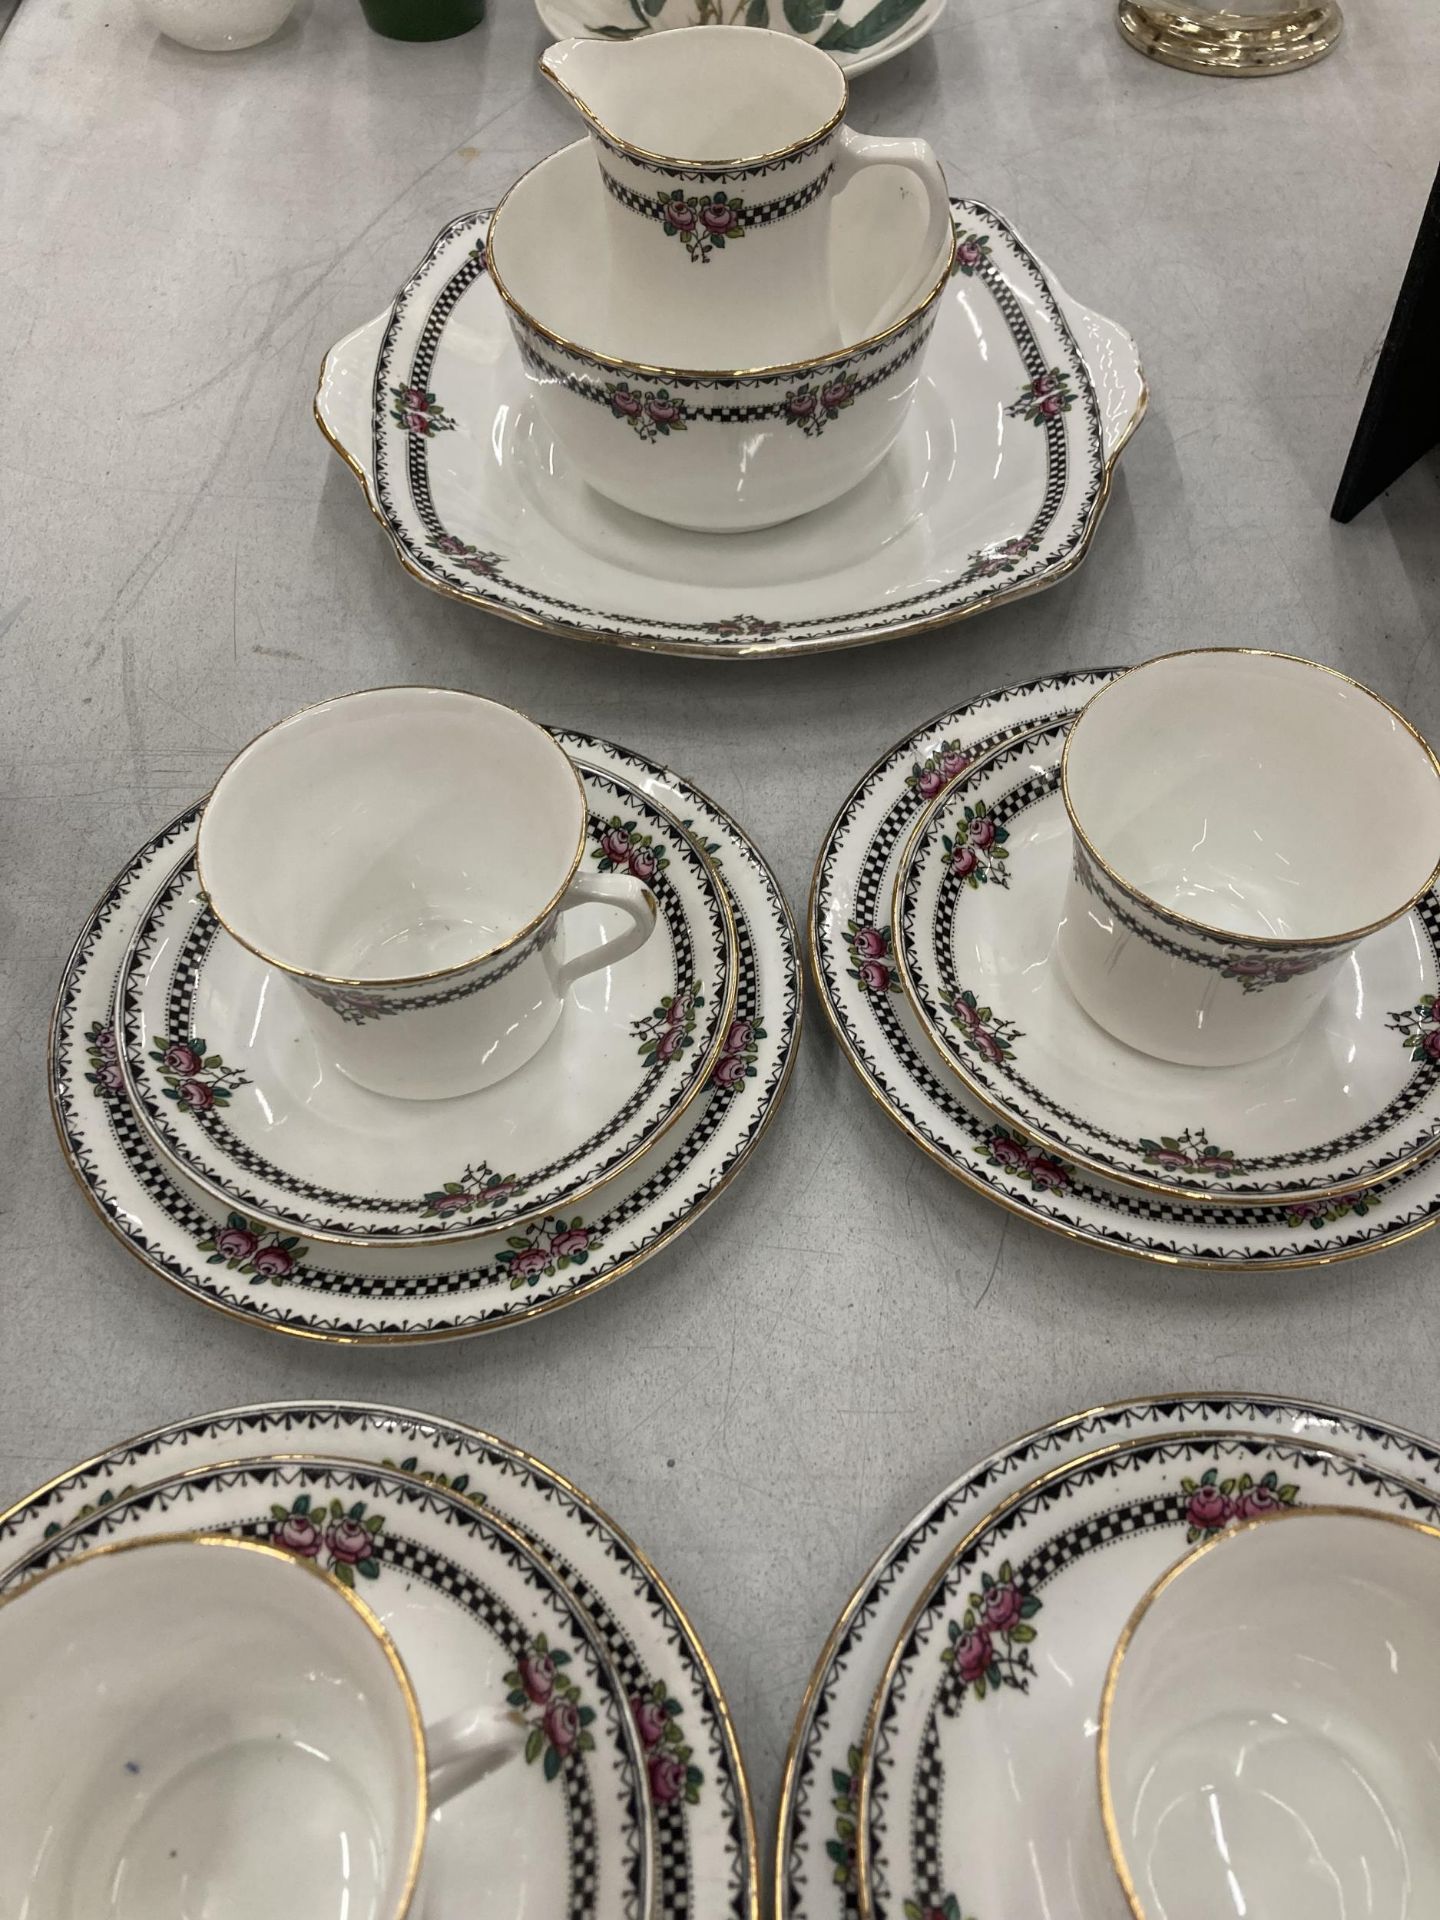 A VICTORIAN CHINA TEASET TO INCLUDE CAKE PLATE, SUGAR BOWL, CREAM JUG, CUPS, SAUCERS AND SIDE PLATES - Image 3 of 3